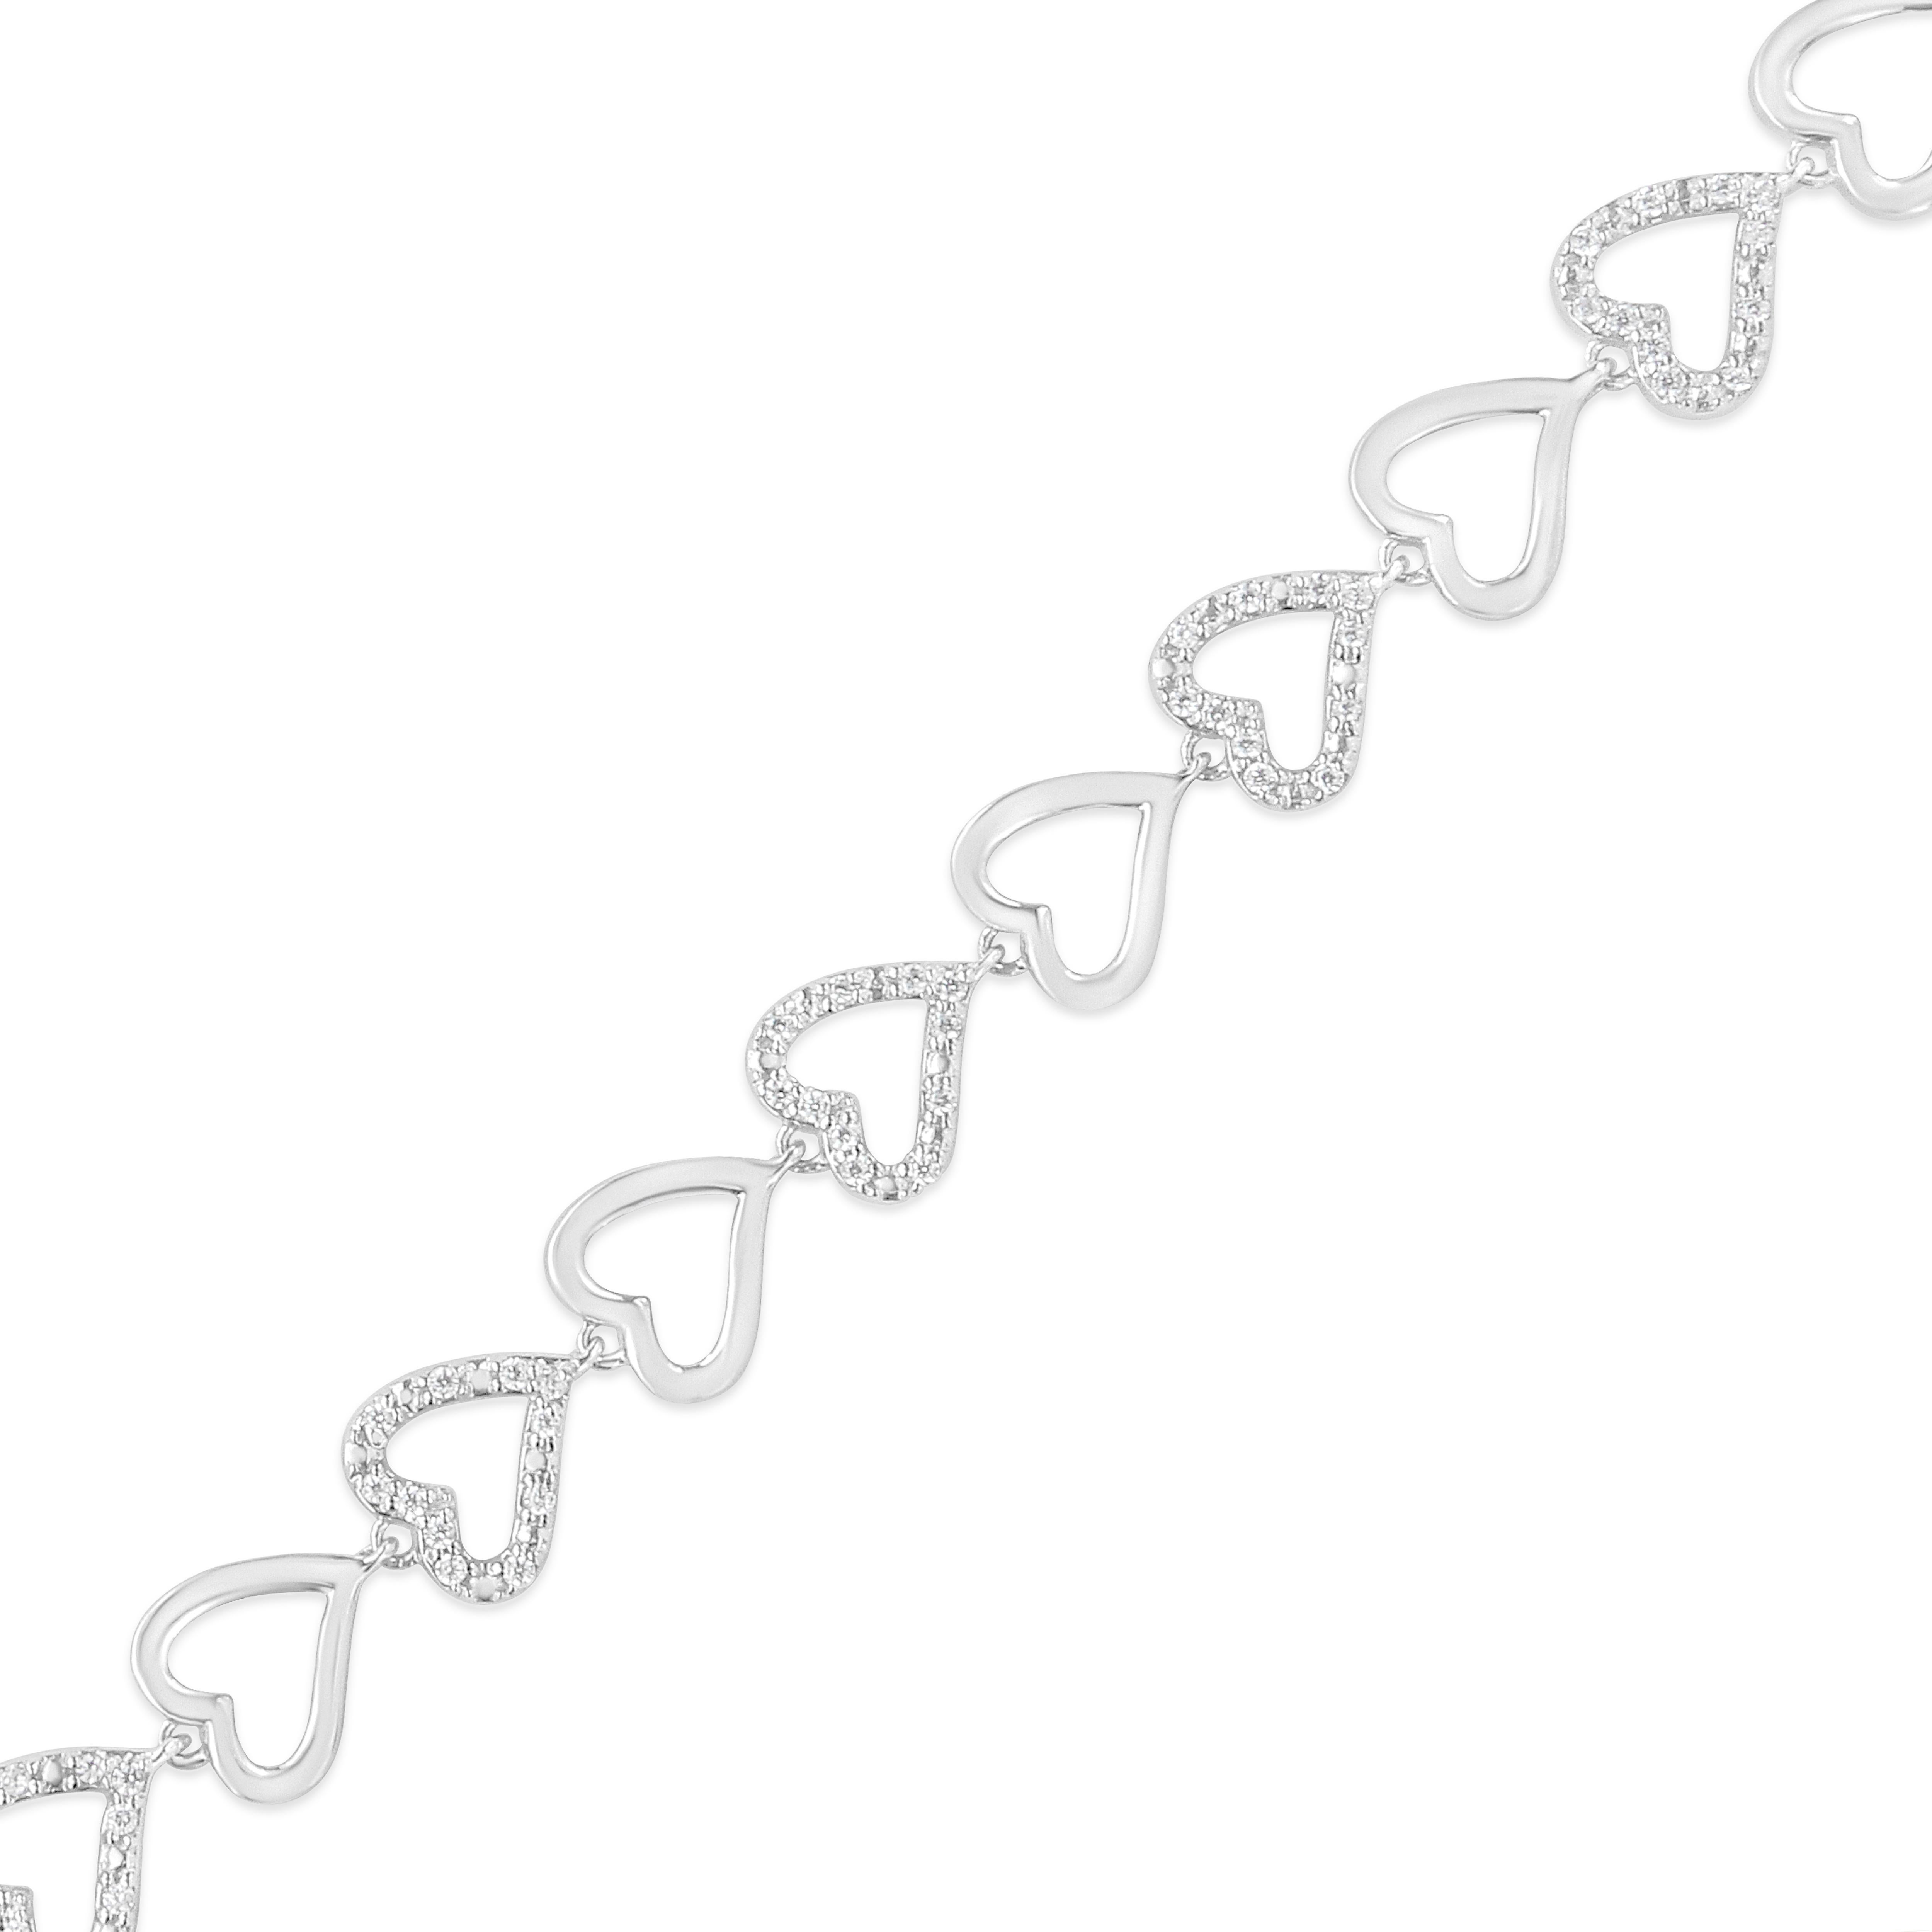 Trendy and sweet, this 1/2 cttw bracelet is designed with alluring silver heart links that will delicately rest on your wrist. This bracelet is crafted in the finest .925 sterling silver, and plated with rhodium (a platinum-family metal) for a